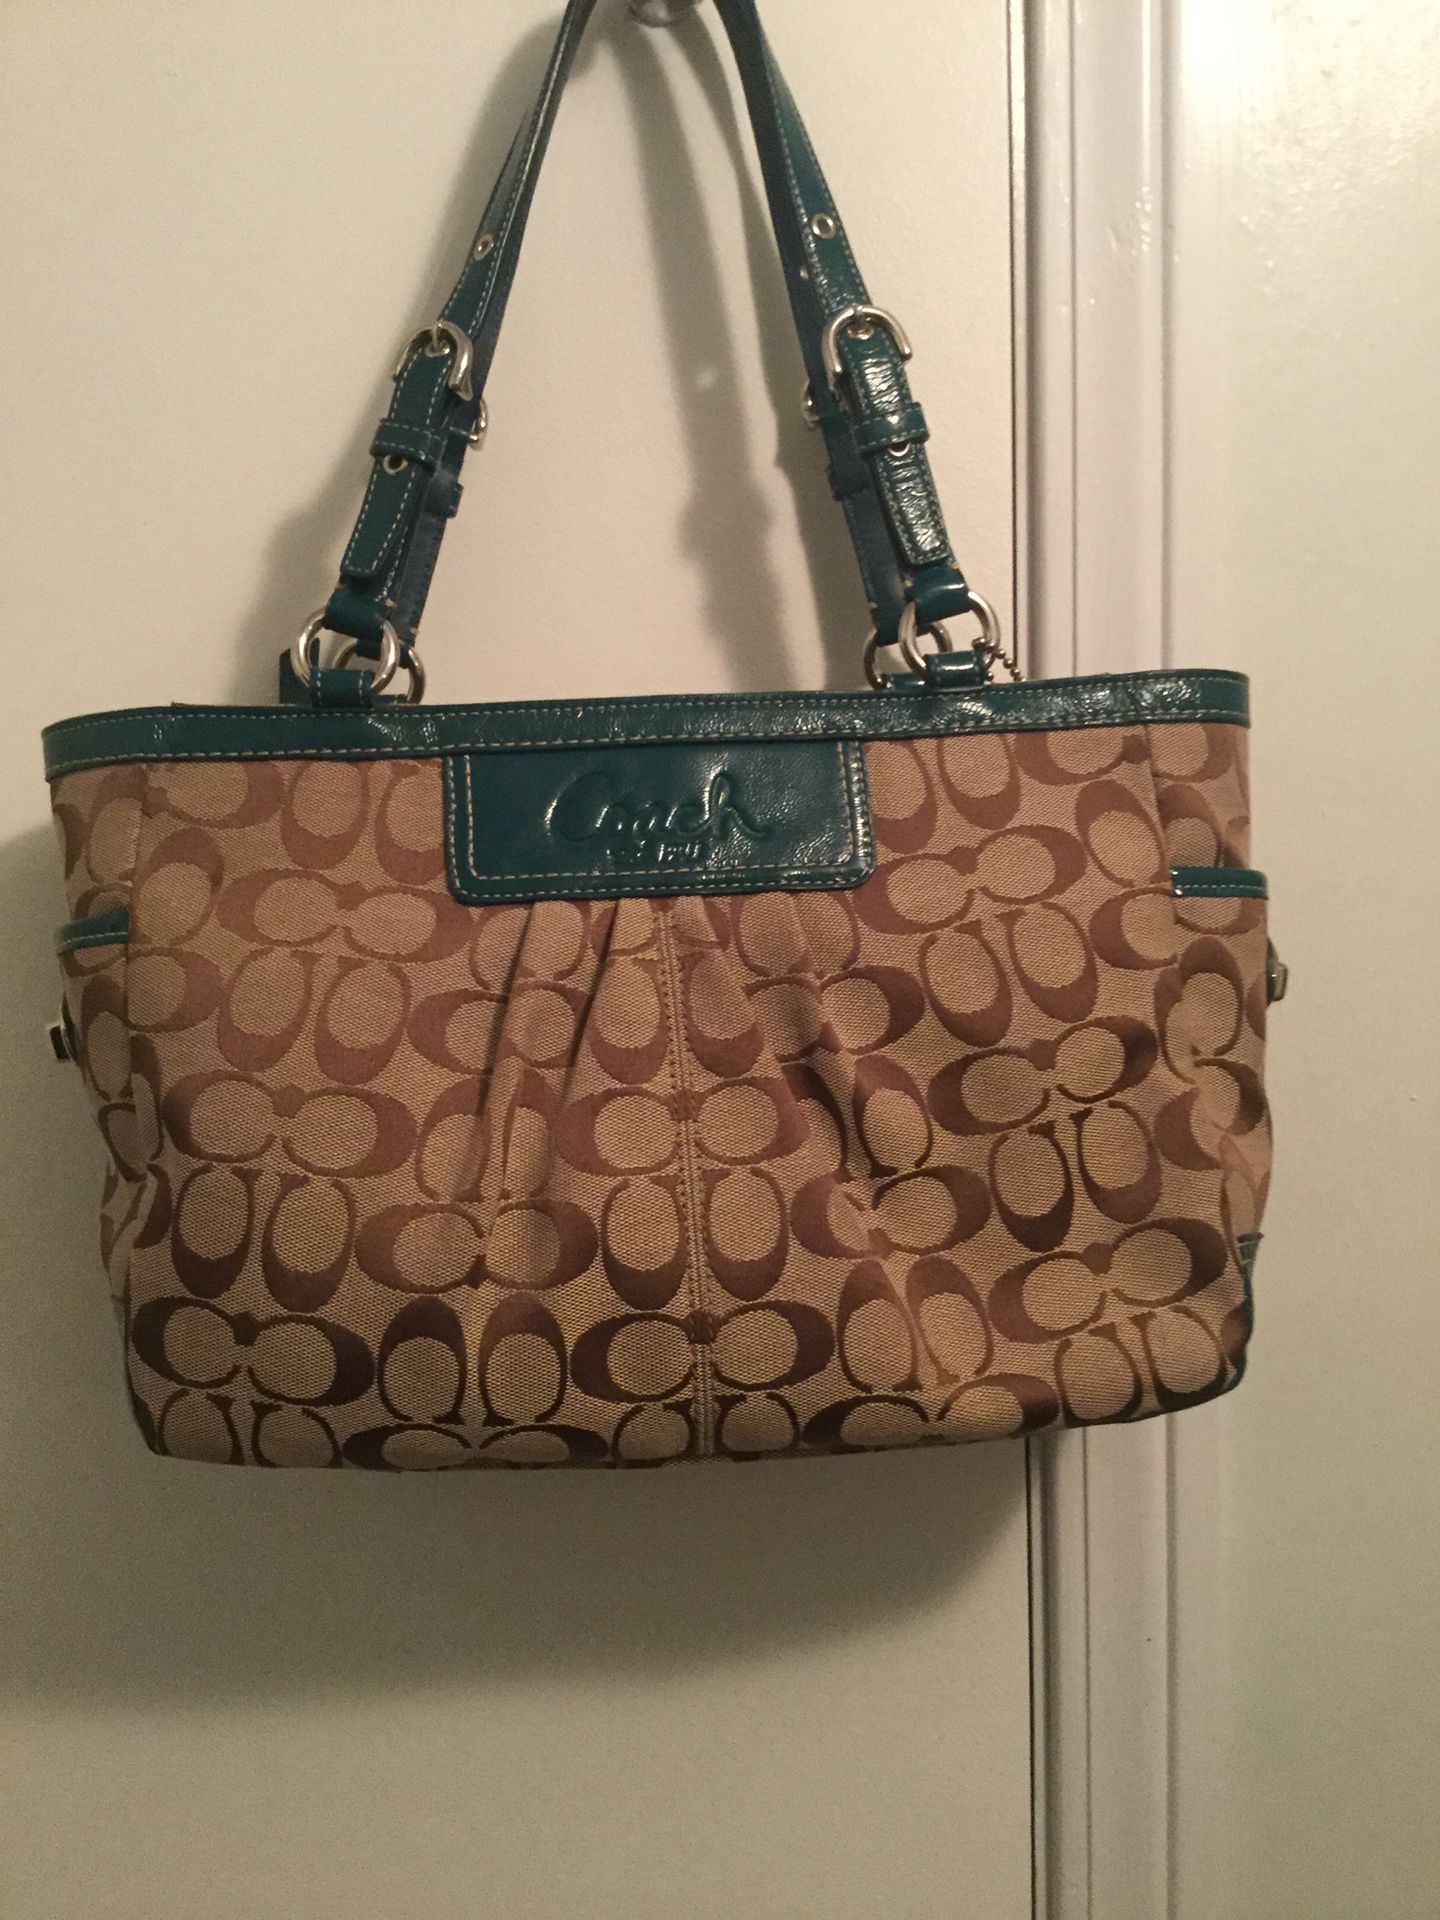 Authentic coach purse used